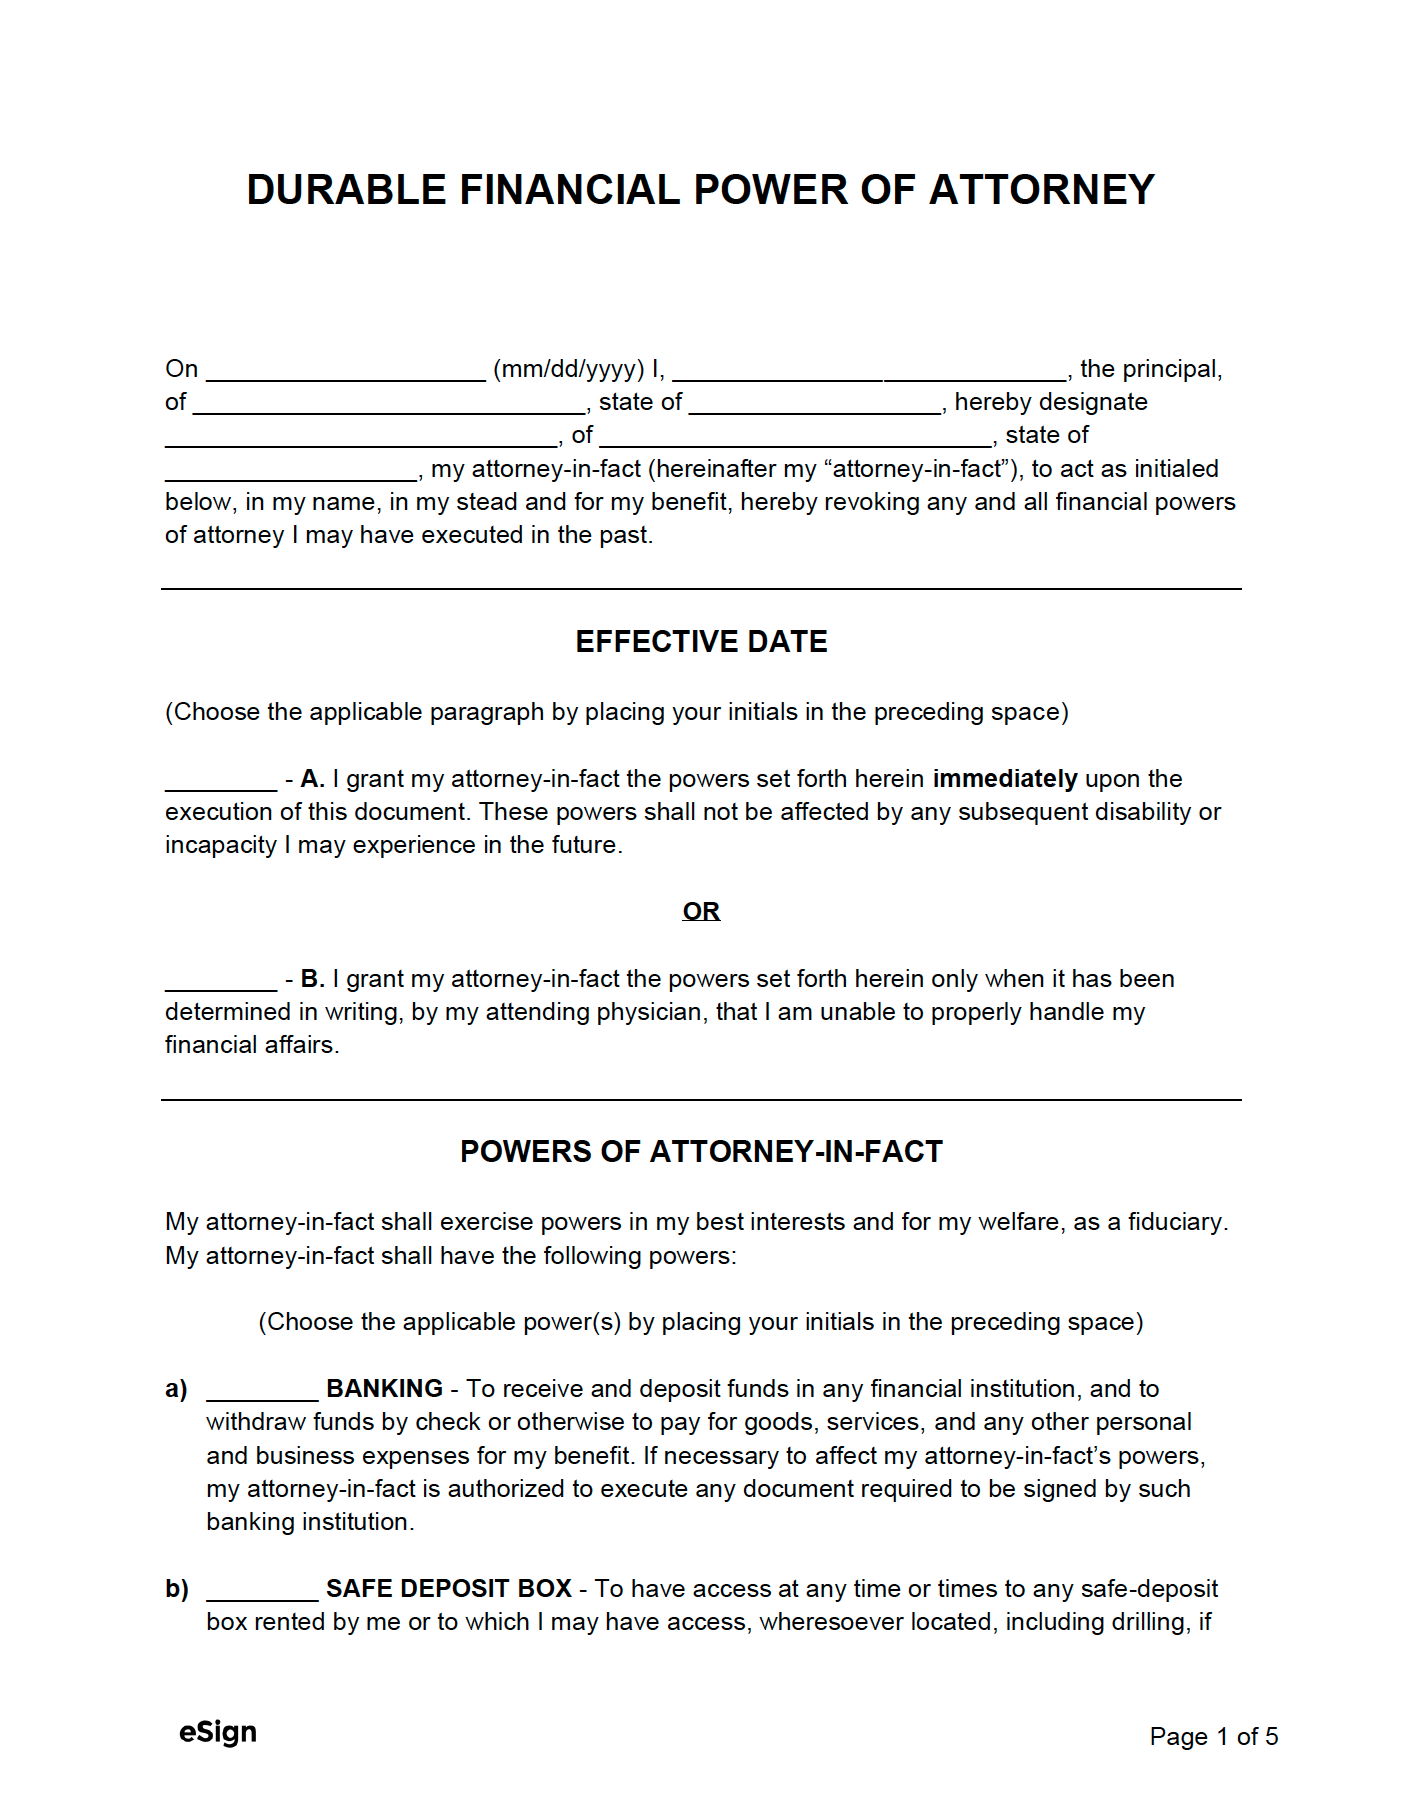 Free Durable Power of Attorney Forms - PDF  Word